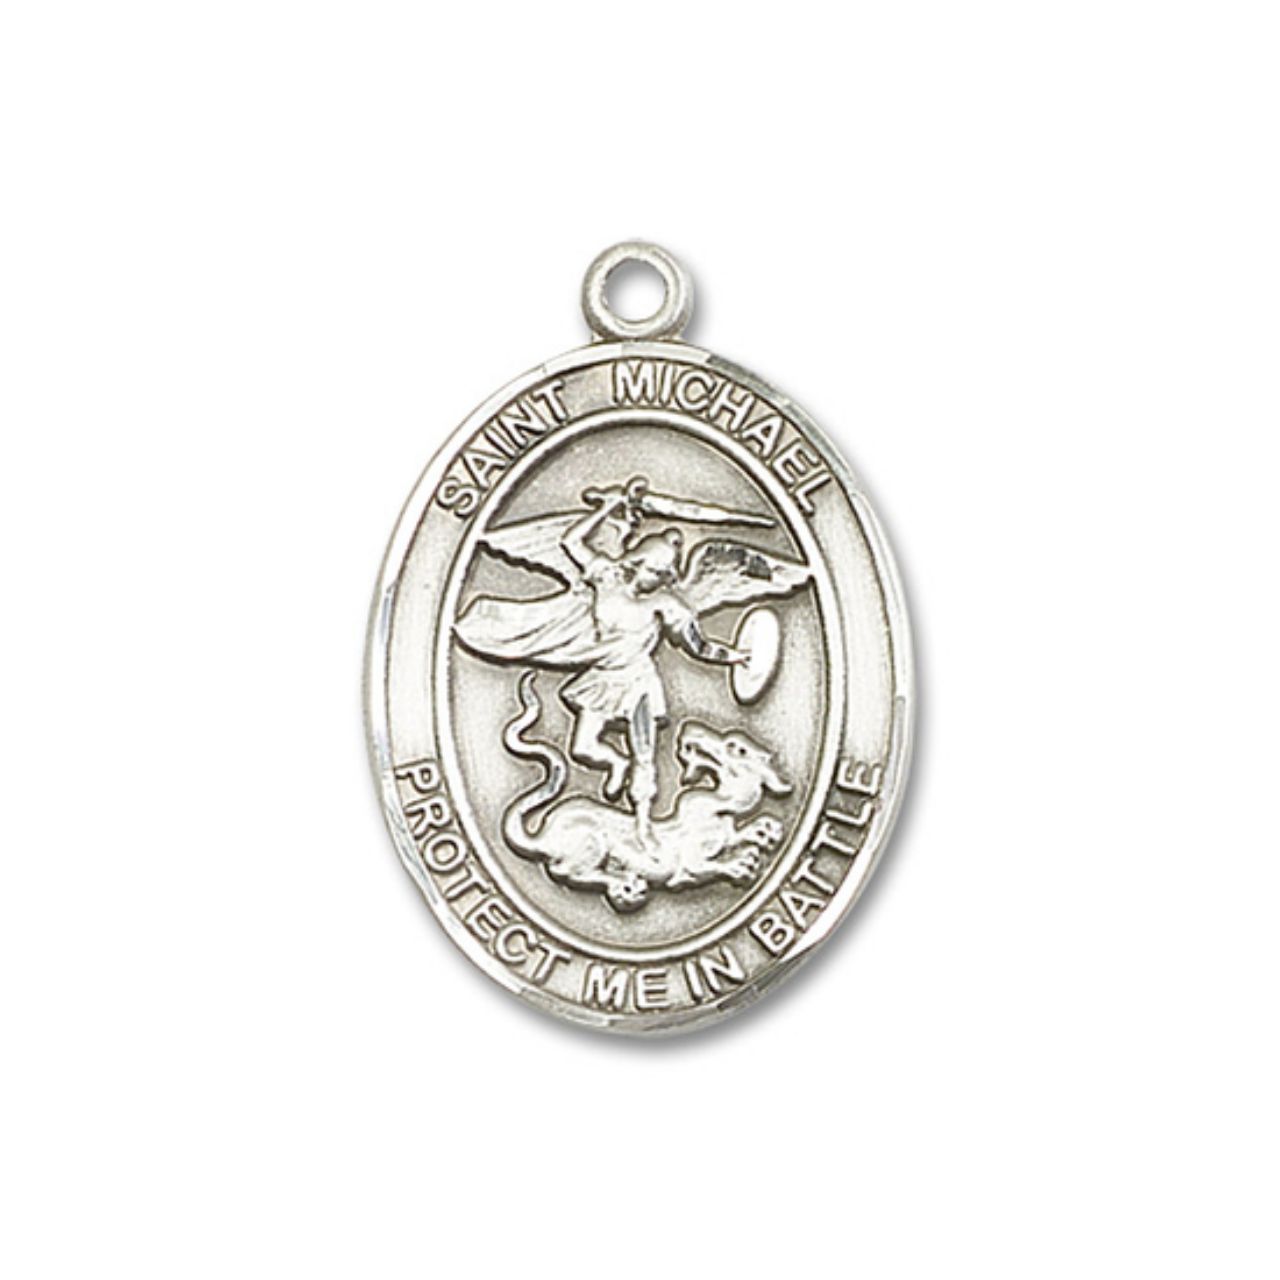 St. Michael & Guardian Angel Medal - Sterling Silver Oval Pendant (2 Sizes)